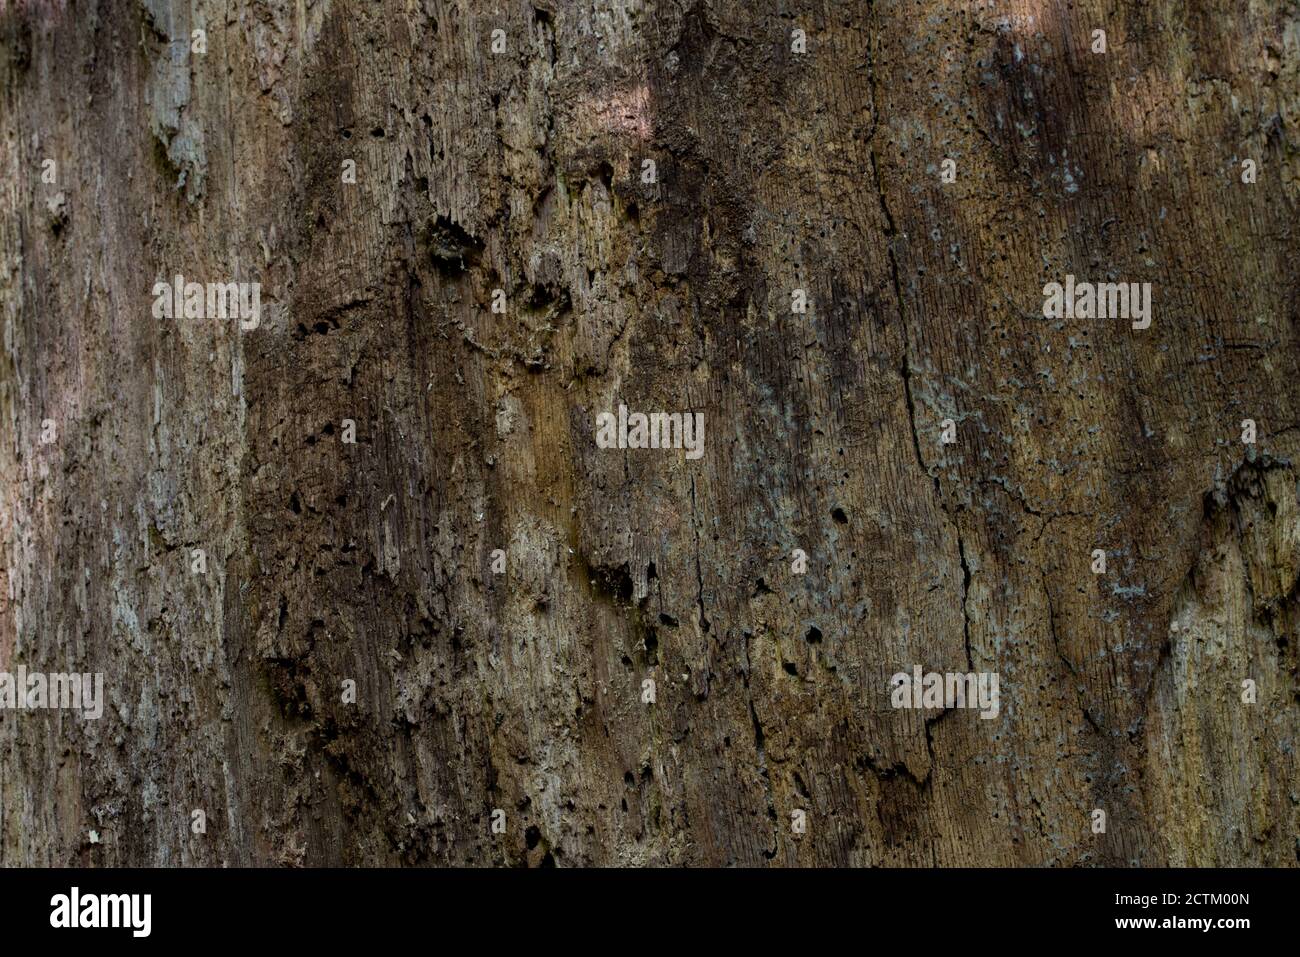 old oak tree deamaged by insects closeup selecive focus Stock Photo